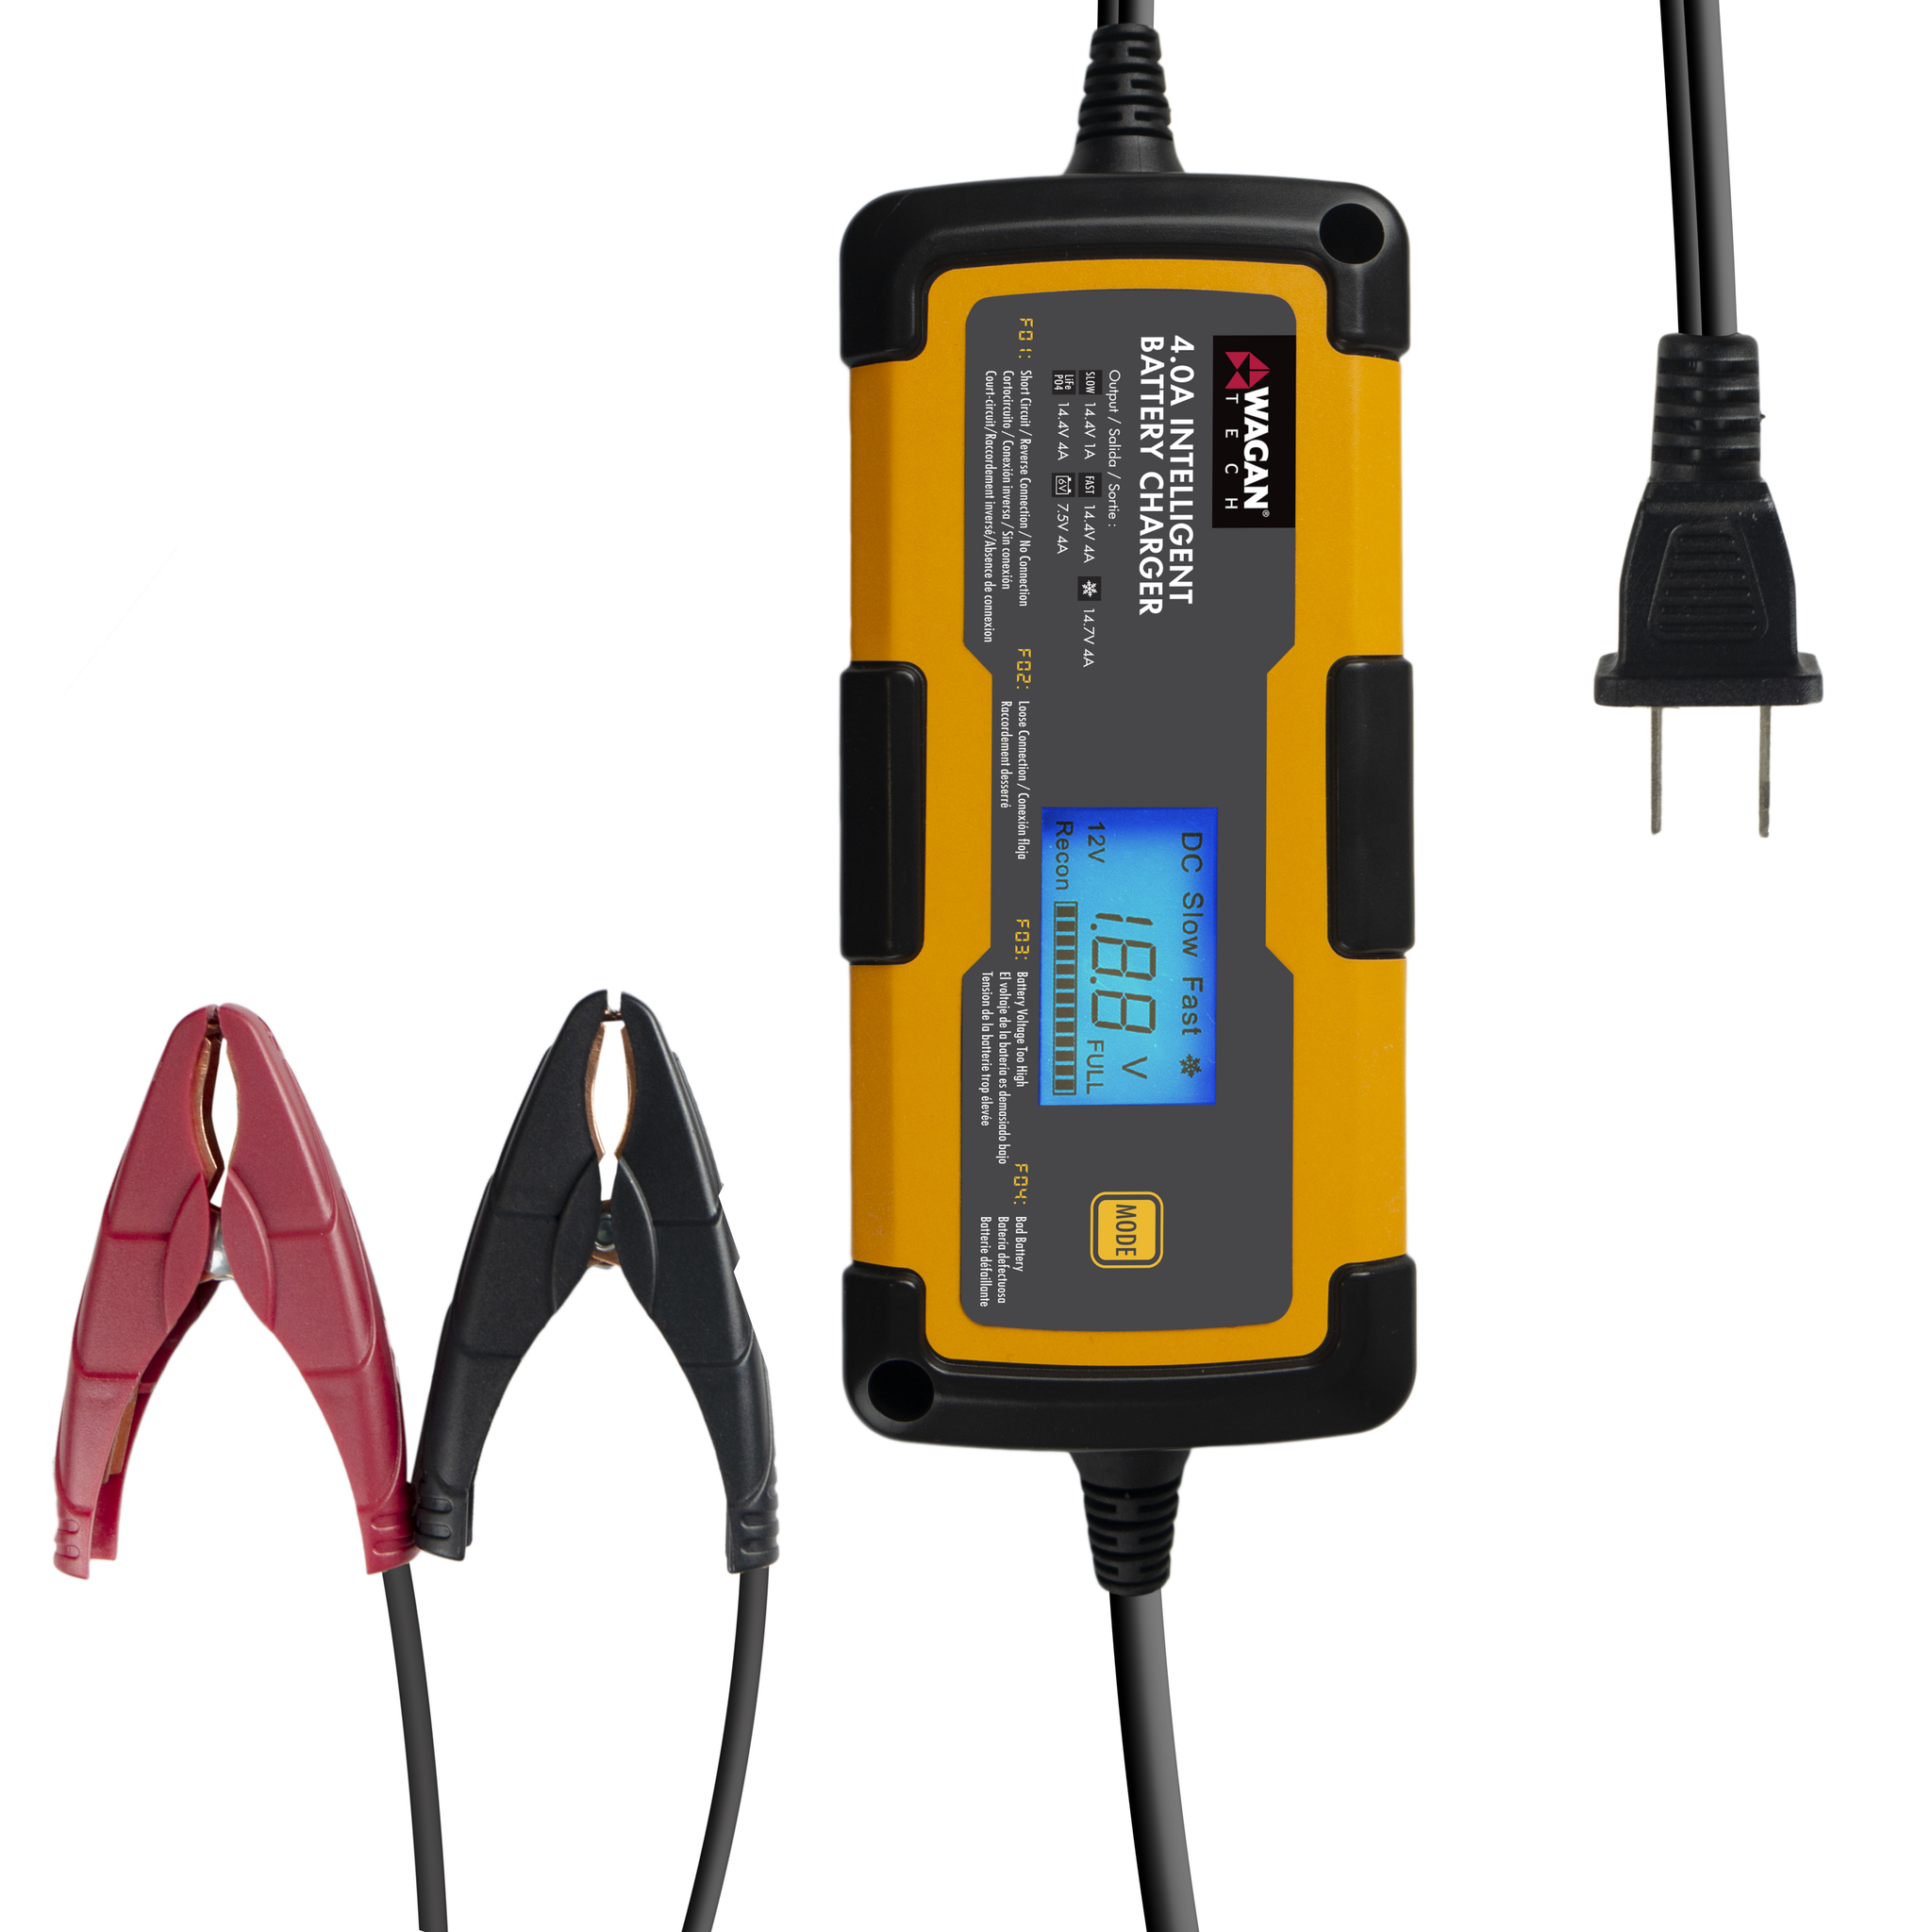 https://cs1.0ps.us/original/opplanet-wagan-4a-intelligent-battery-charger-yellow-one-size-el7403-main